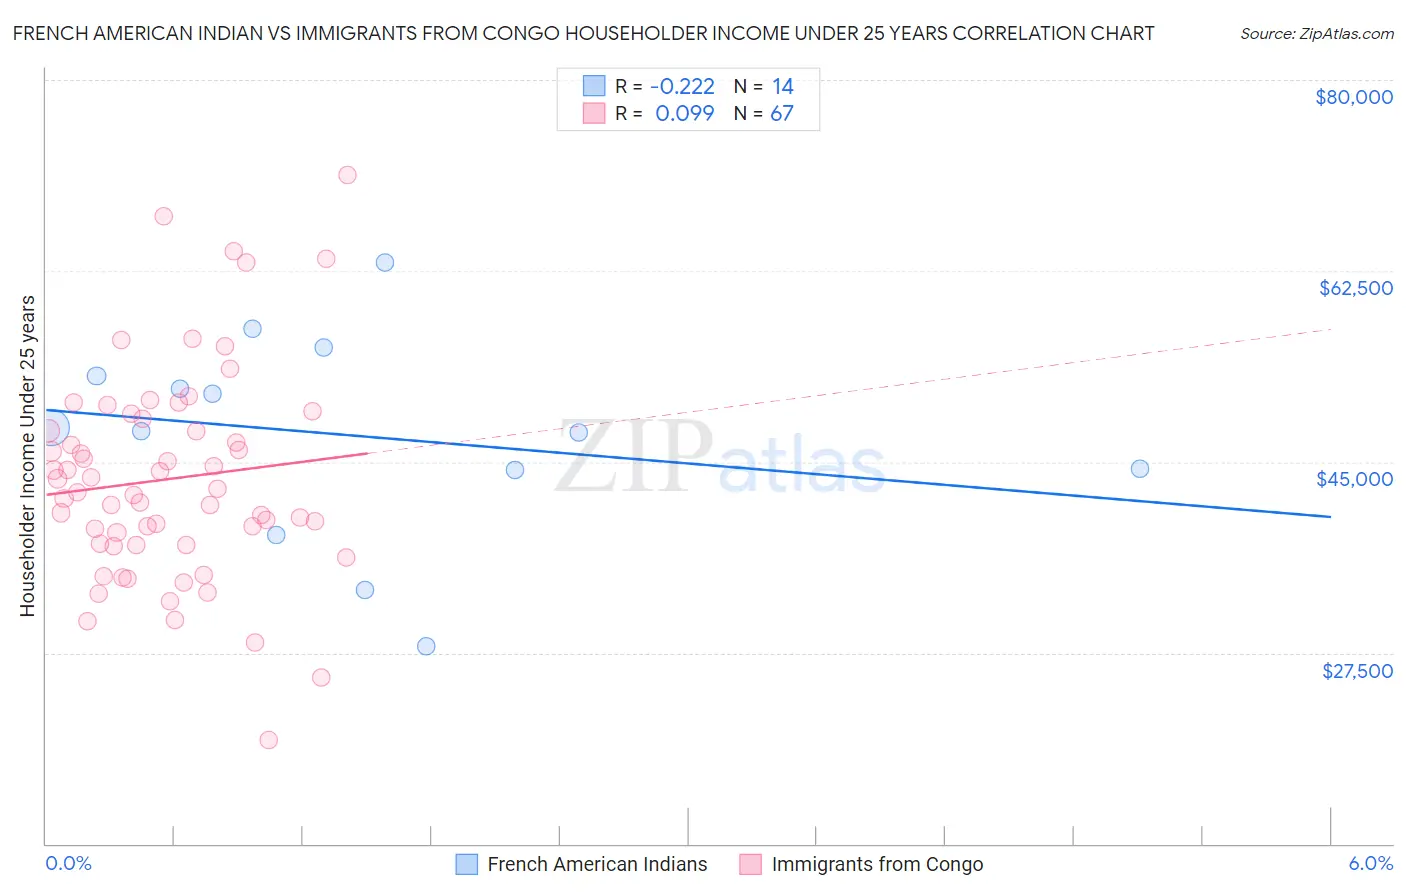 French American Indian vs Immigrants from Congo Householder Income Under 25 years